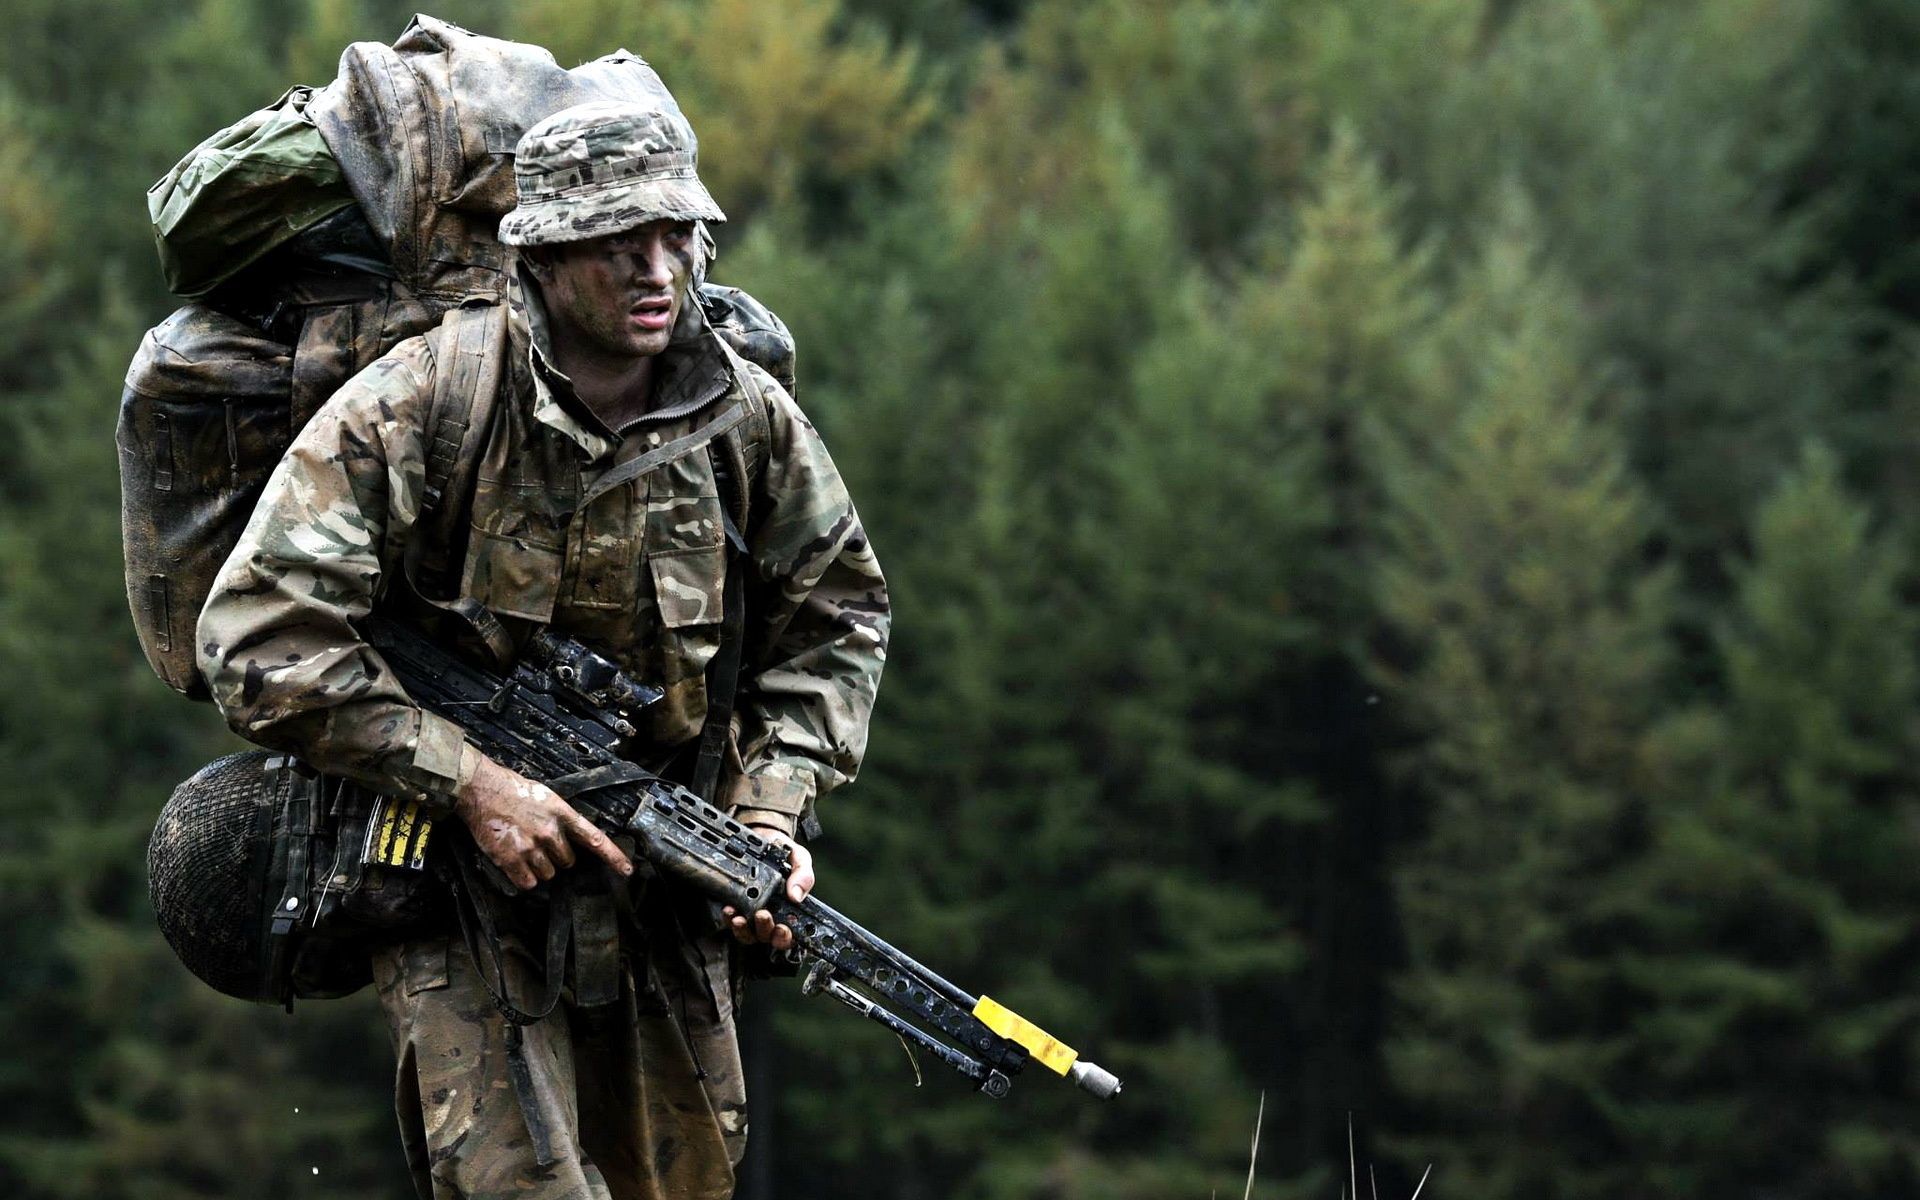 british army. British armed forces, Army soldier, British army